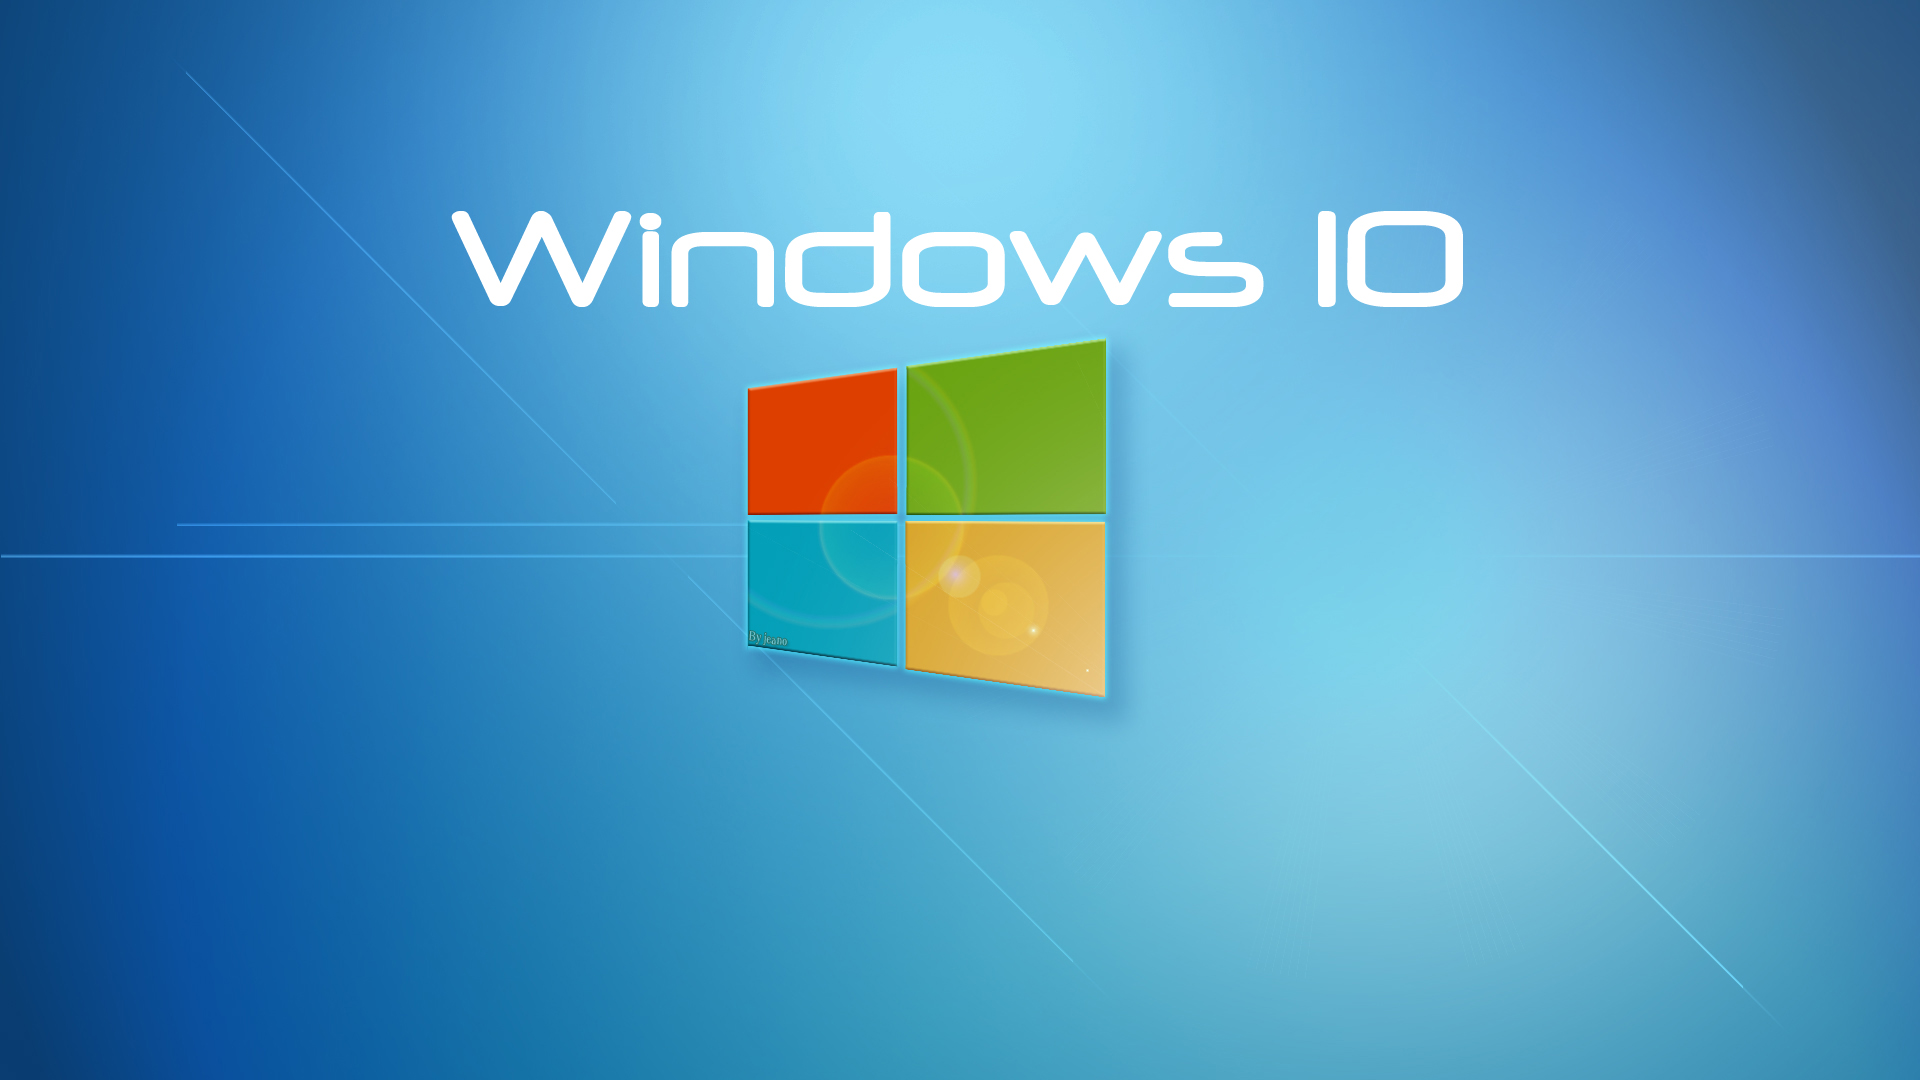 Windows 10 Wallpaper Background CV4 is free HD wallpaper This